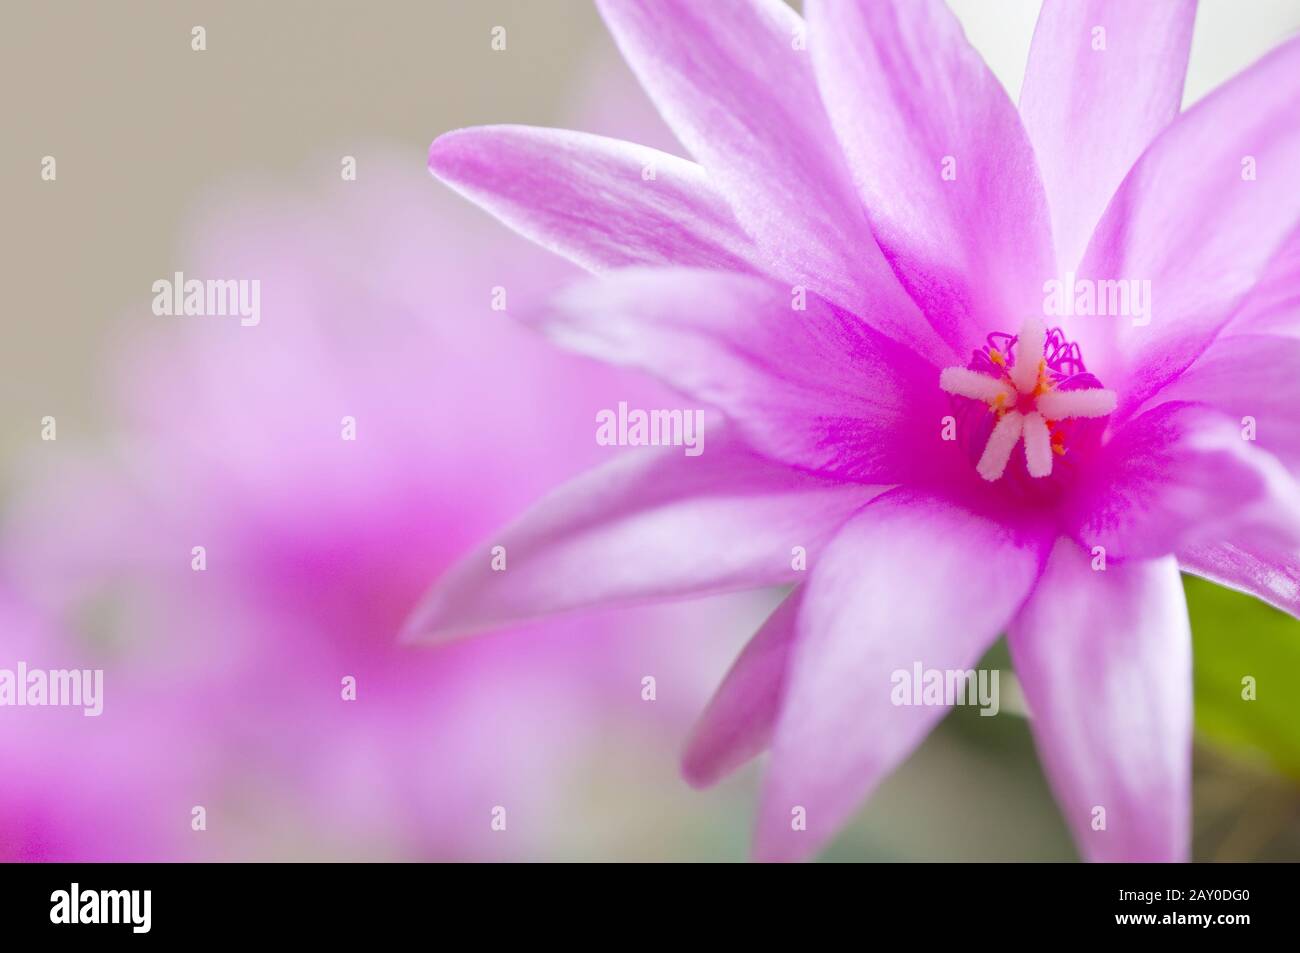 Easter cactus Stock Photo